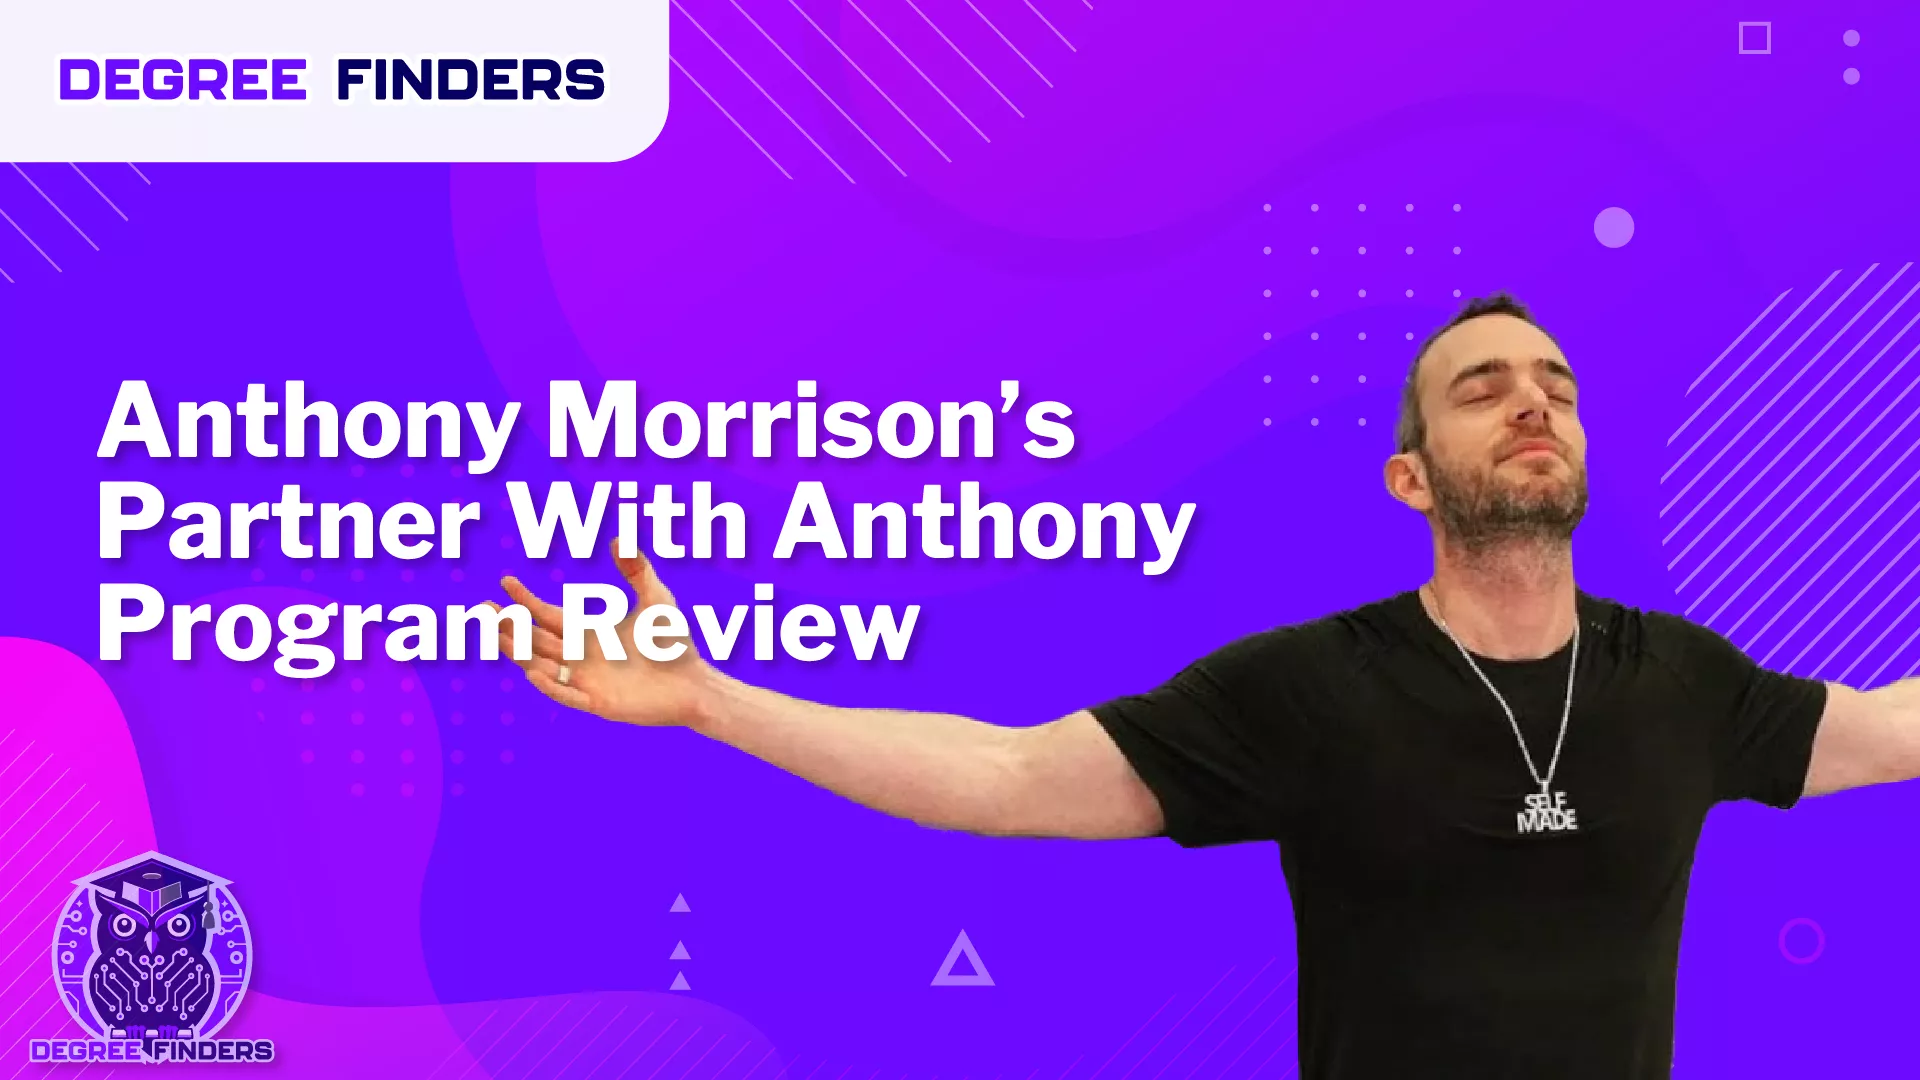 Anthony Morrison’s Partner With Anthony Program Review